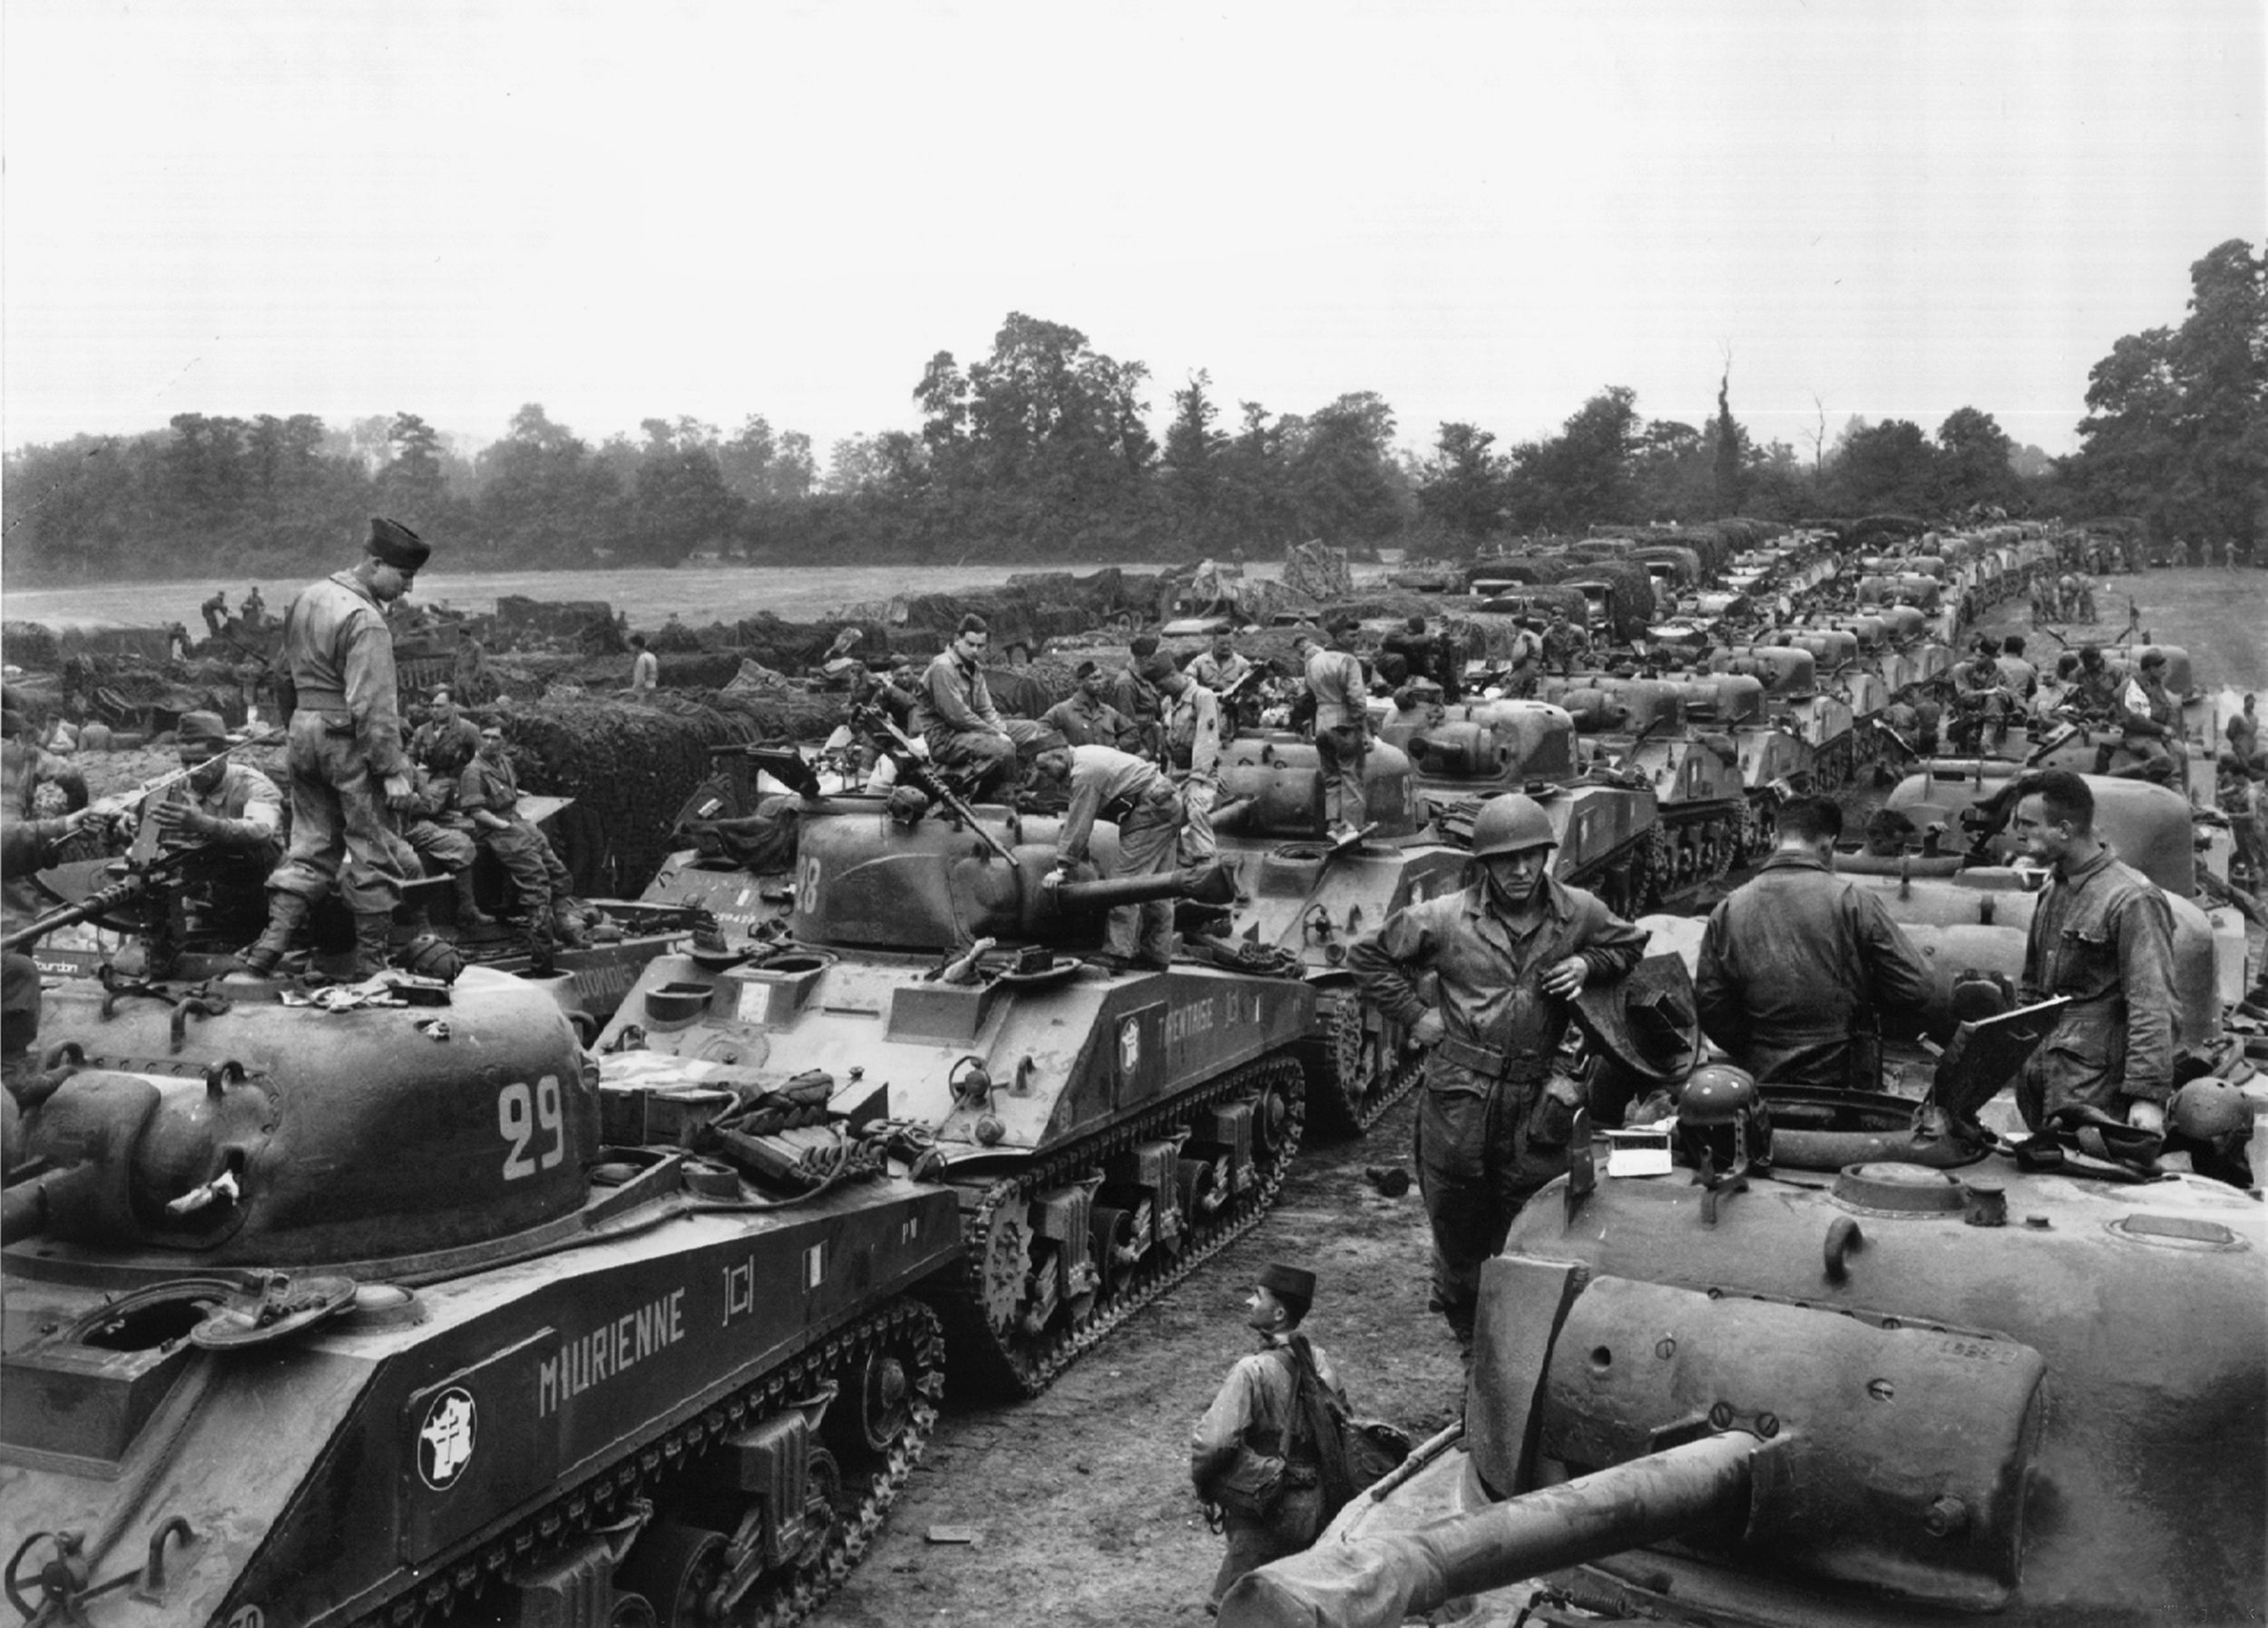 Major General Jacques-Philippe Leclerc’s 2nd French Armored Division prepares to go into action against the Germans in the Falaise Pocket. Determined to liberate Paris, Leclerc was reluctant to get bogged down at Falaise.